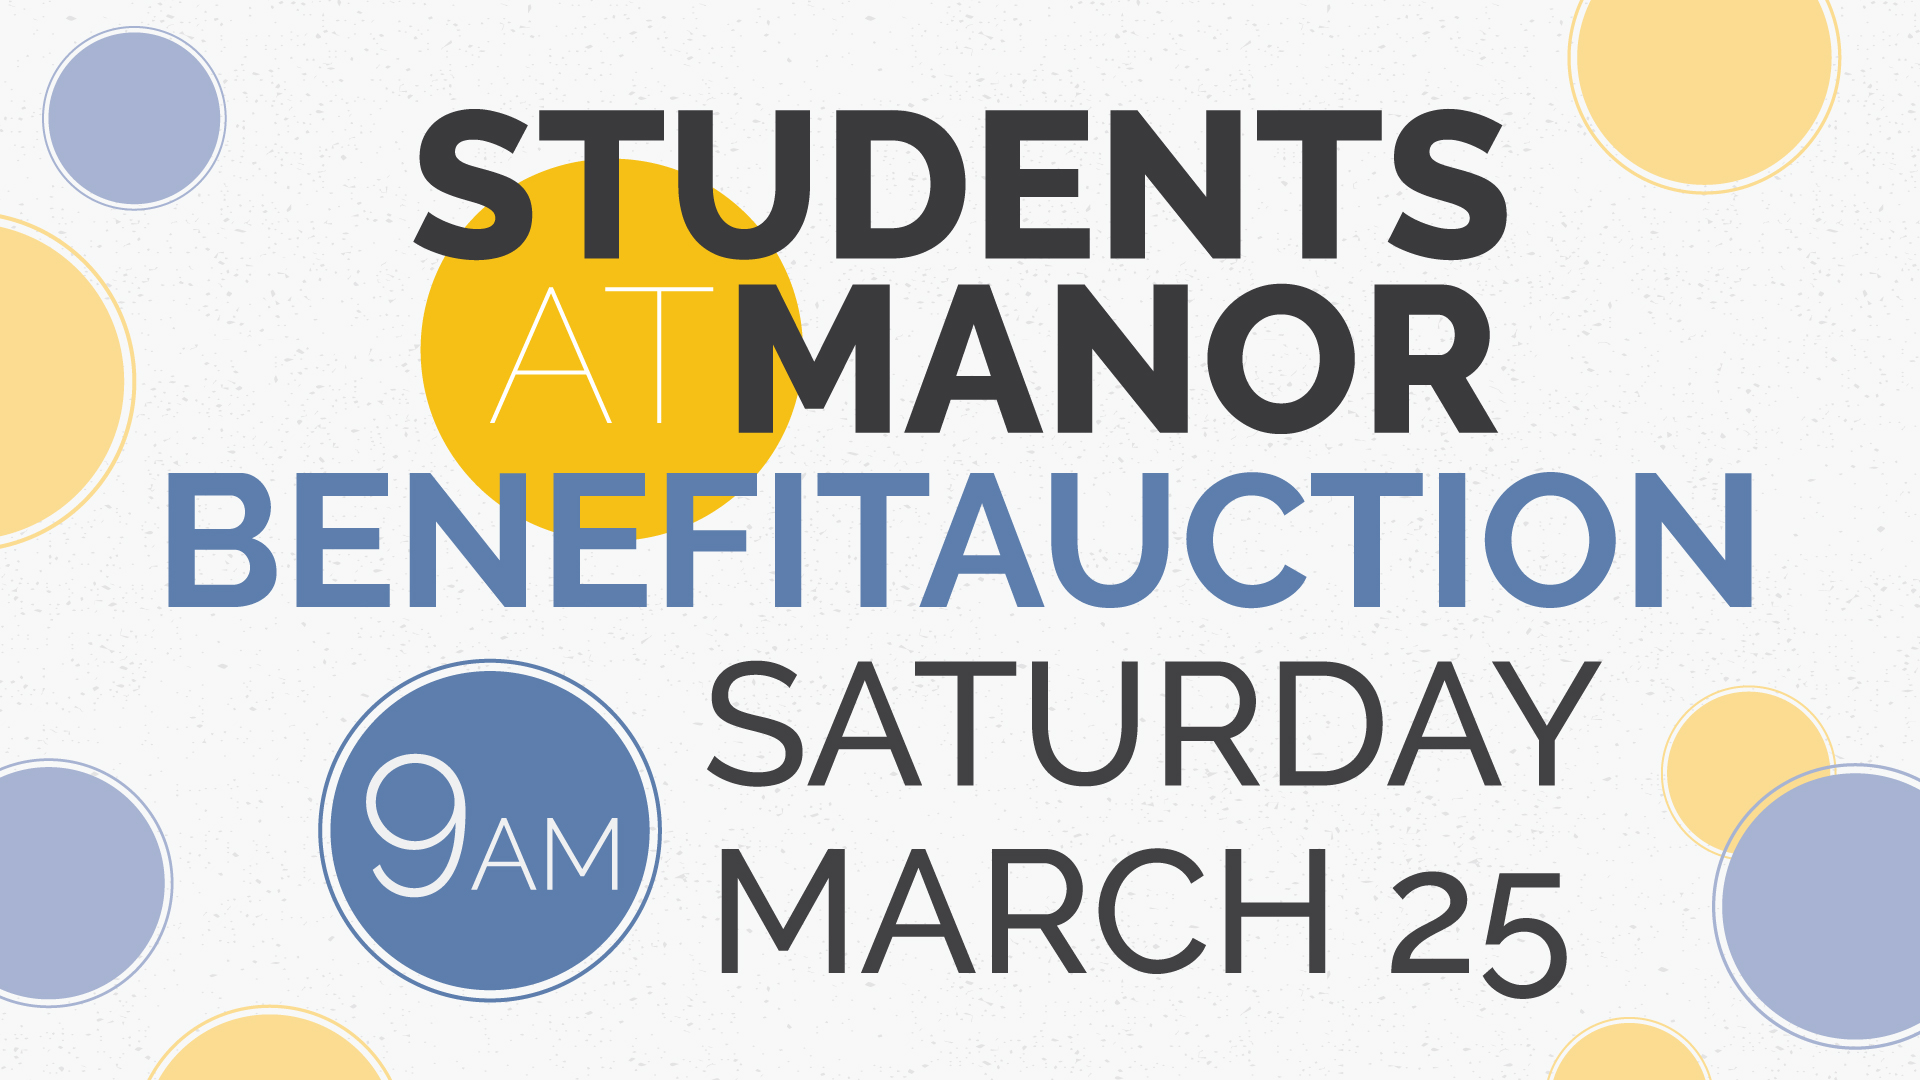 Students at Manor Benefit Auction | Saturday, March 25 at 9AM